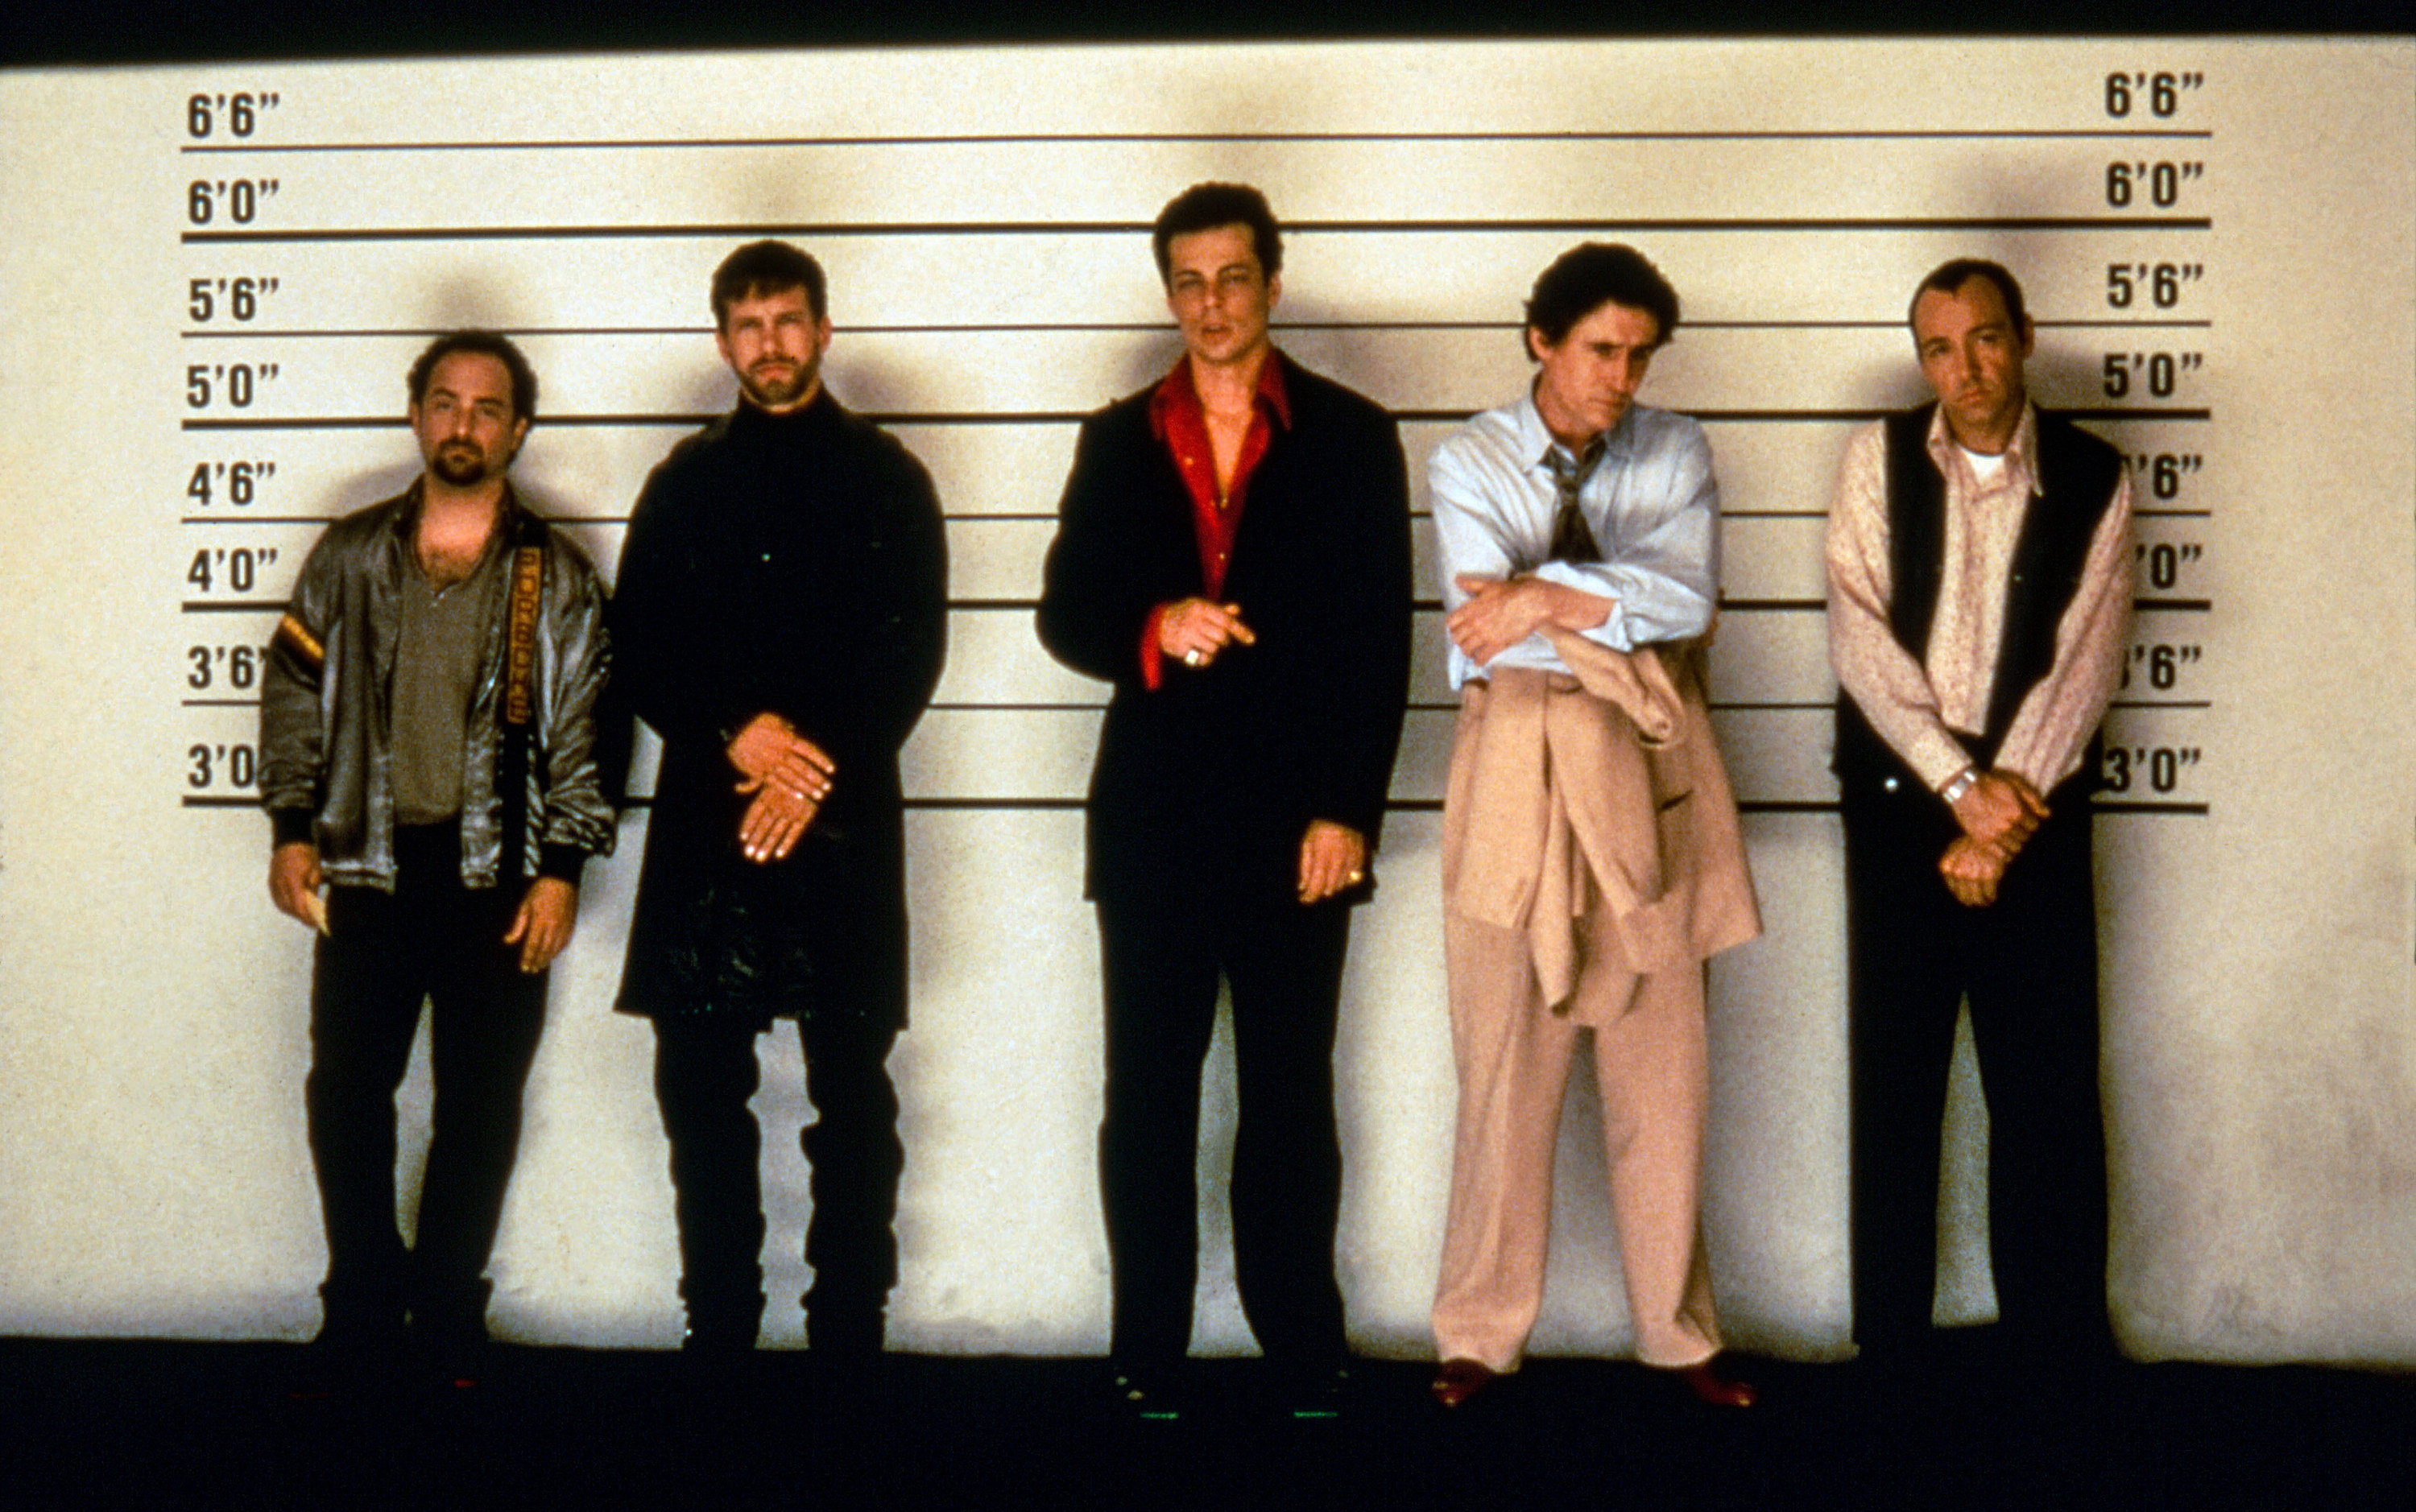 A group of criminals stand in front of a line-up